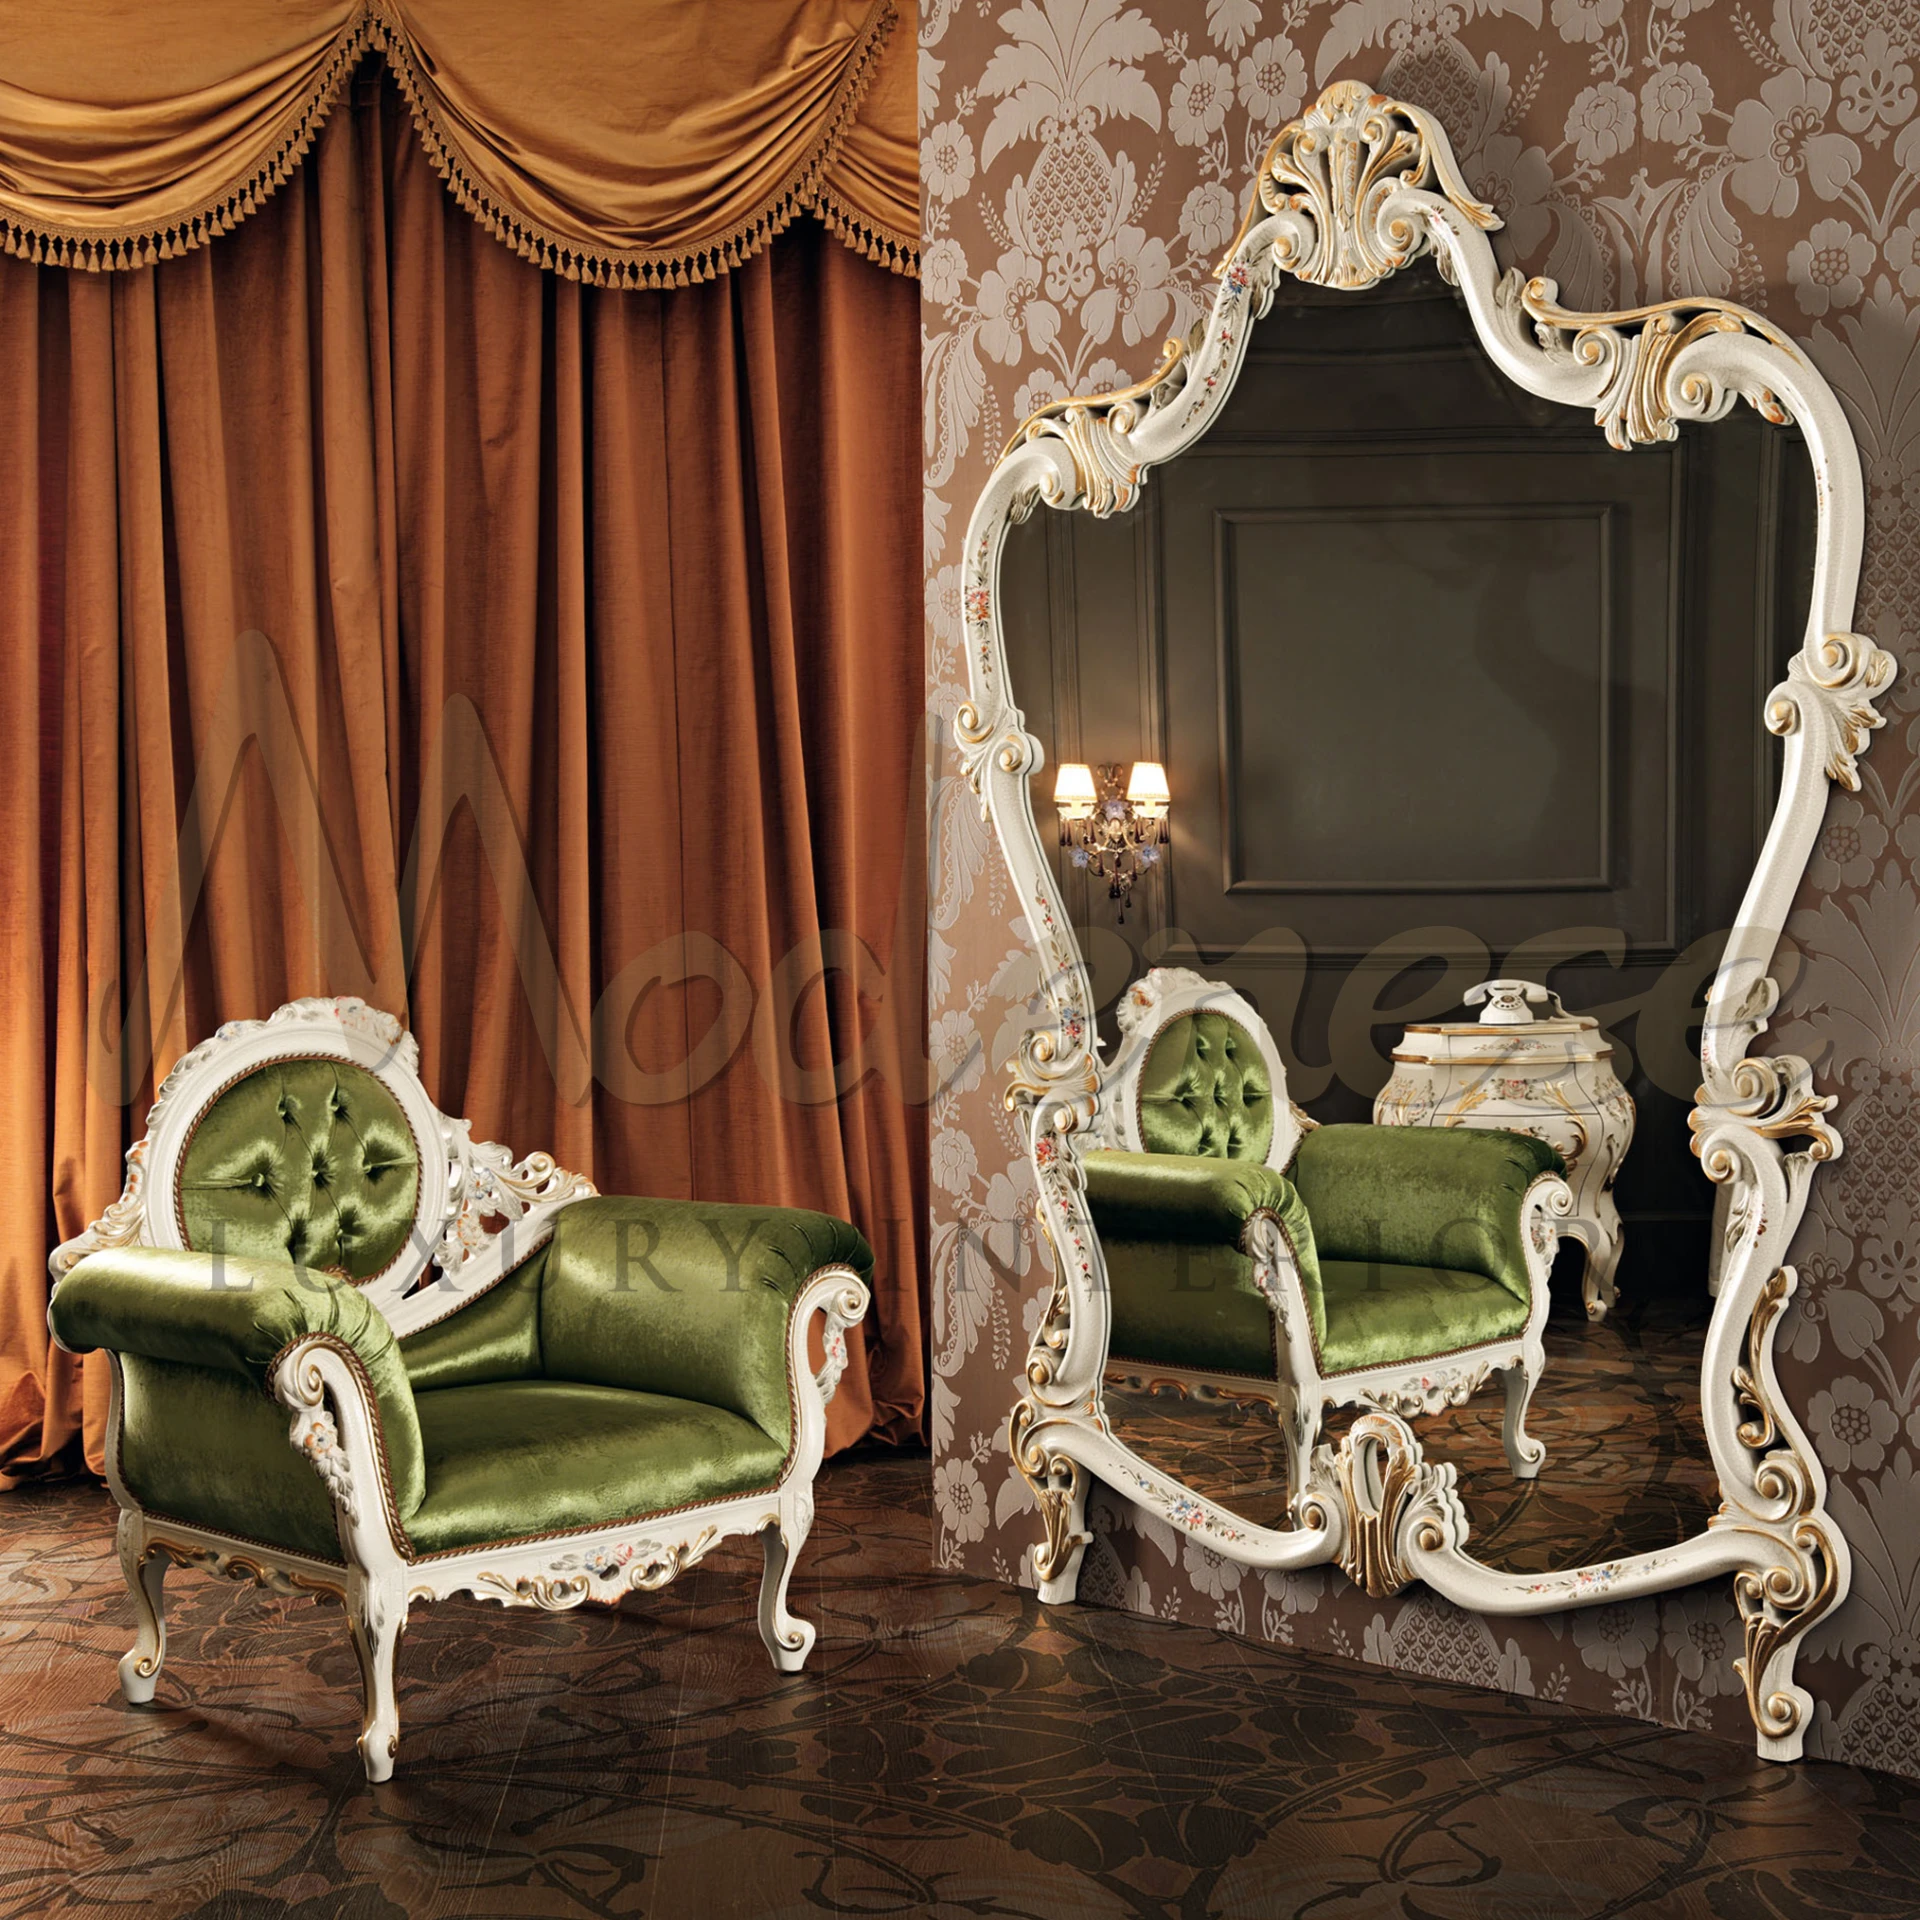 Elegant Wall Art Grand Mirror for luxury palace's entrances